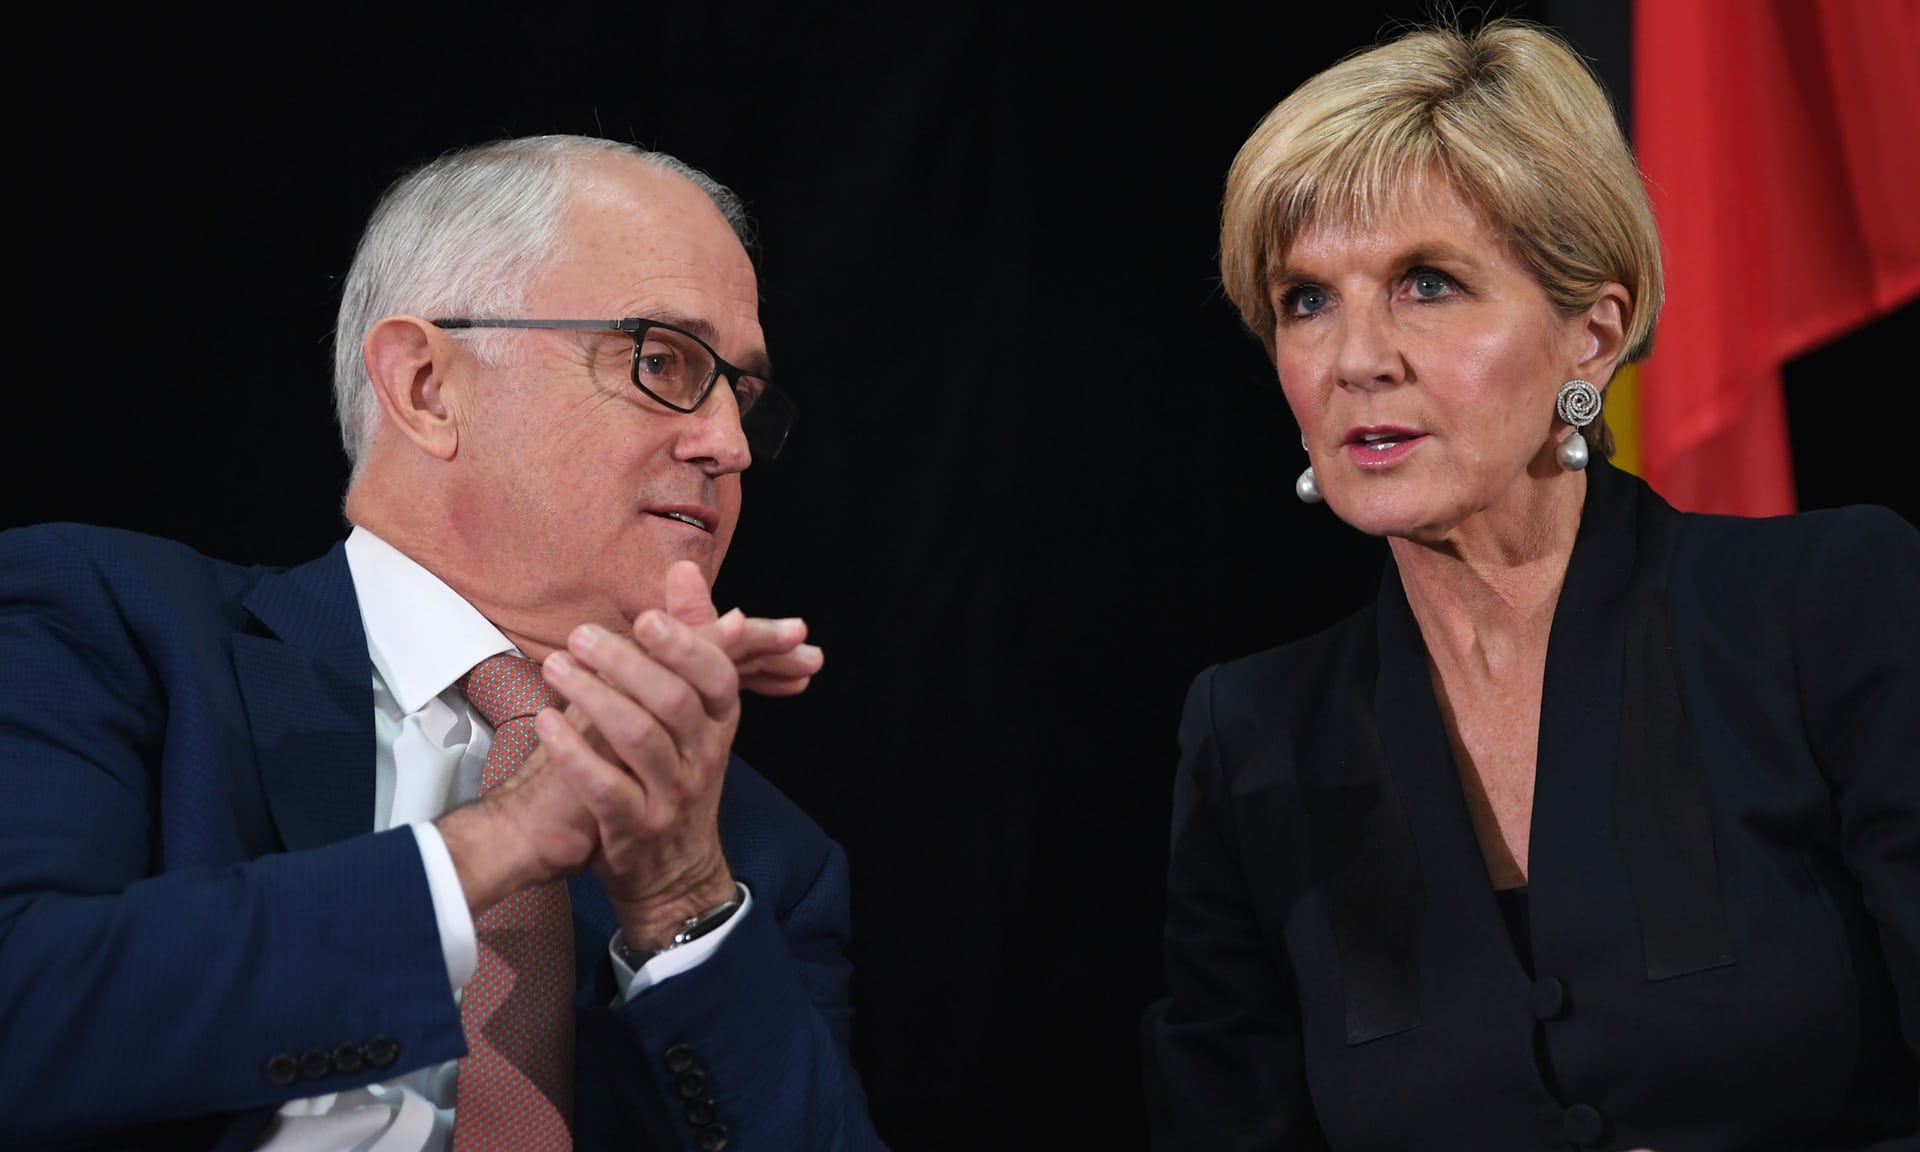 Malcolm Turnbull and Julie Bishop at the launch of the foreign policy white paper. The foreign affairs minister said Australia would resist the ‘false hope of protectionism and isolationism’. Photograph: Lukas Coch/AAP